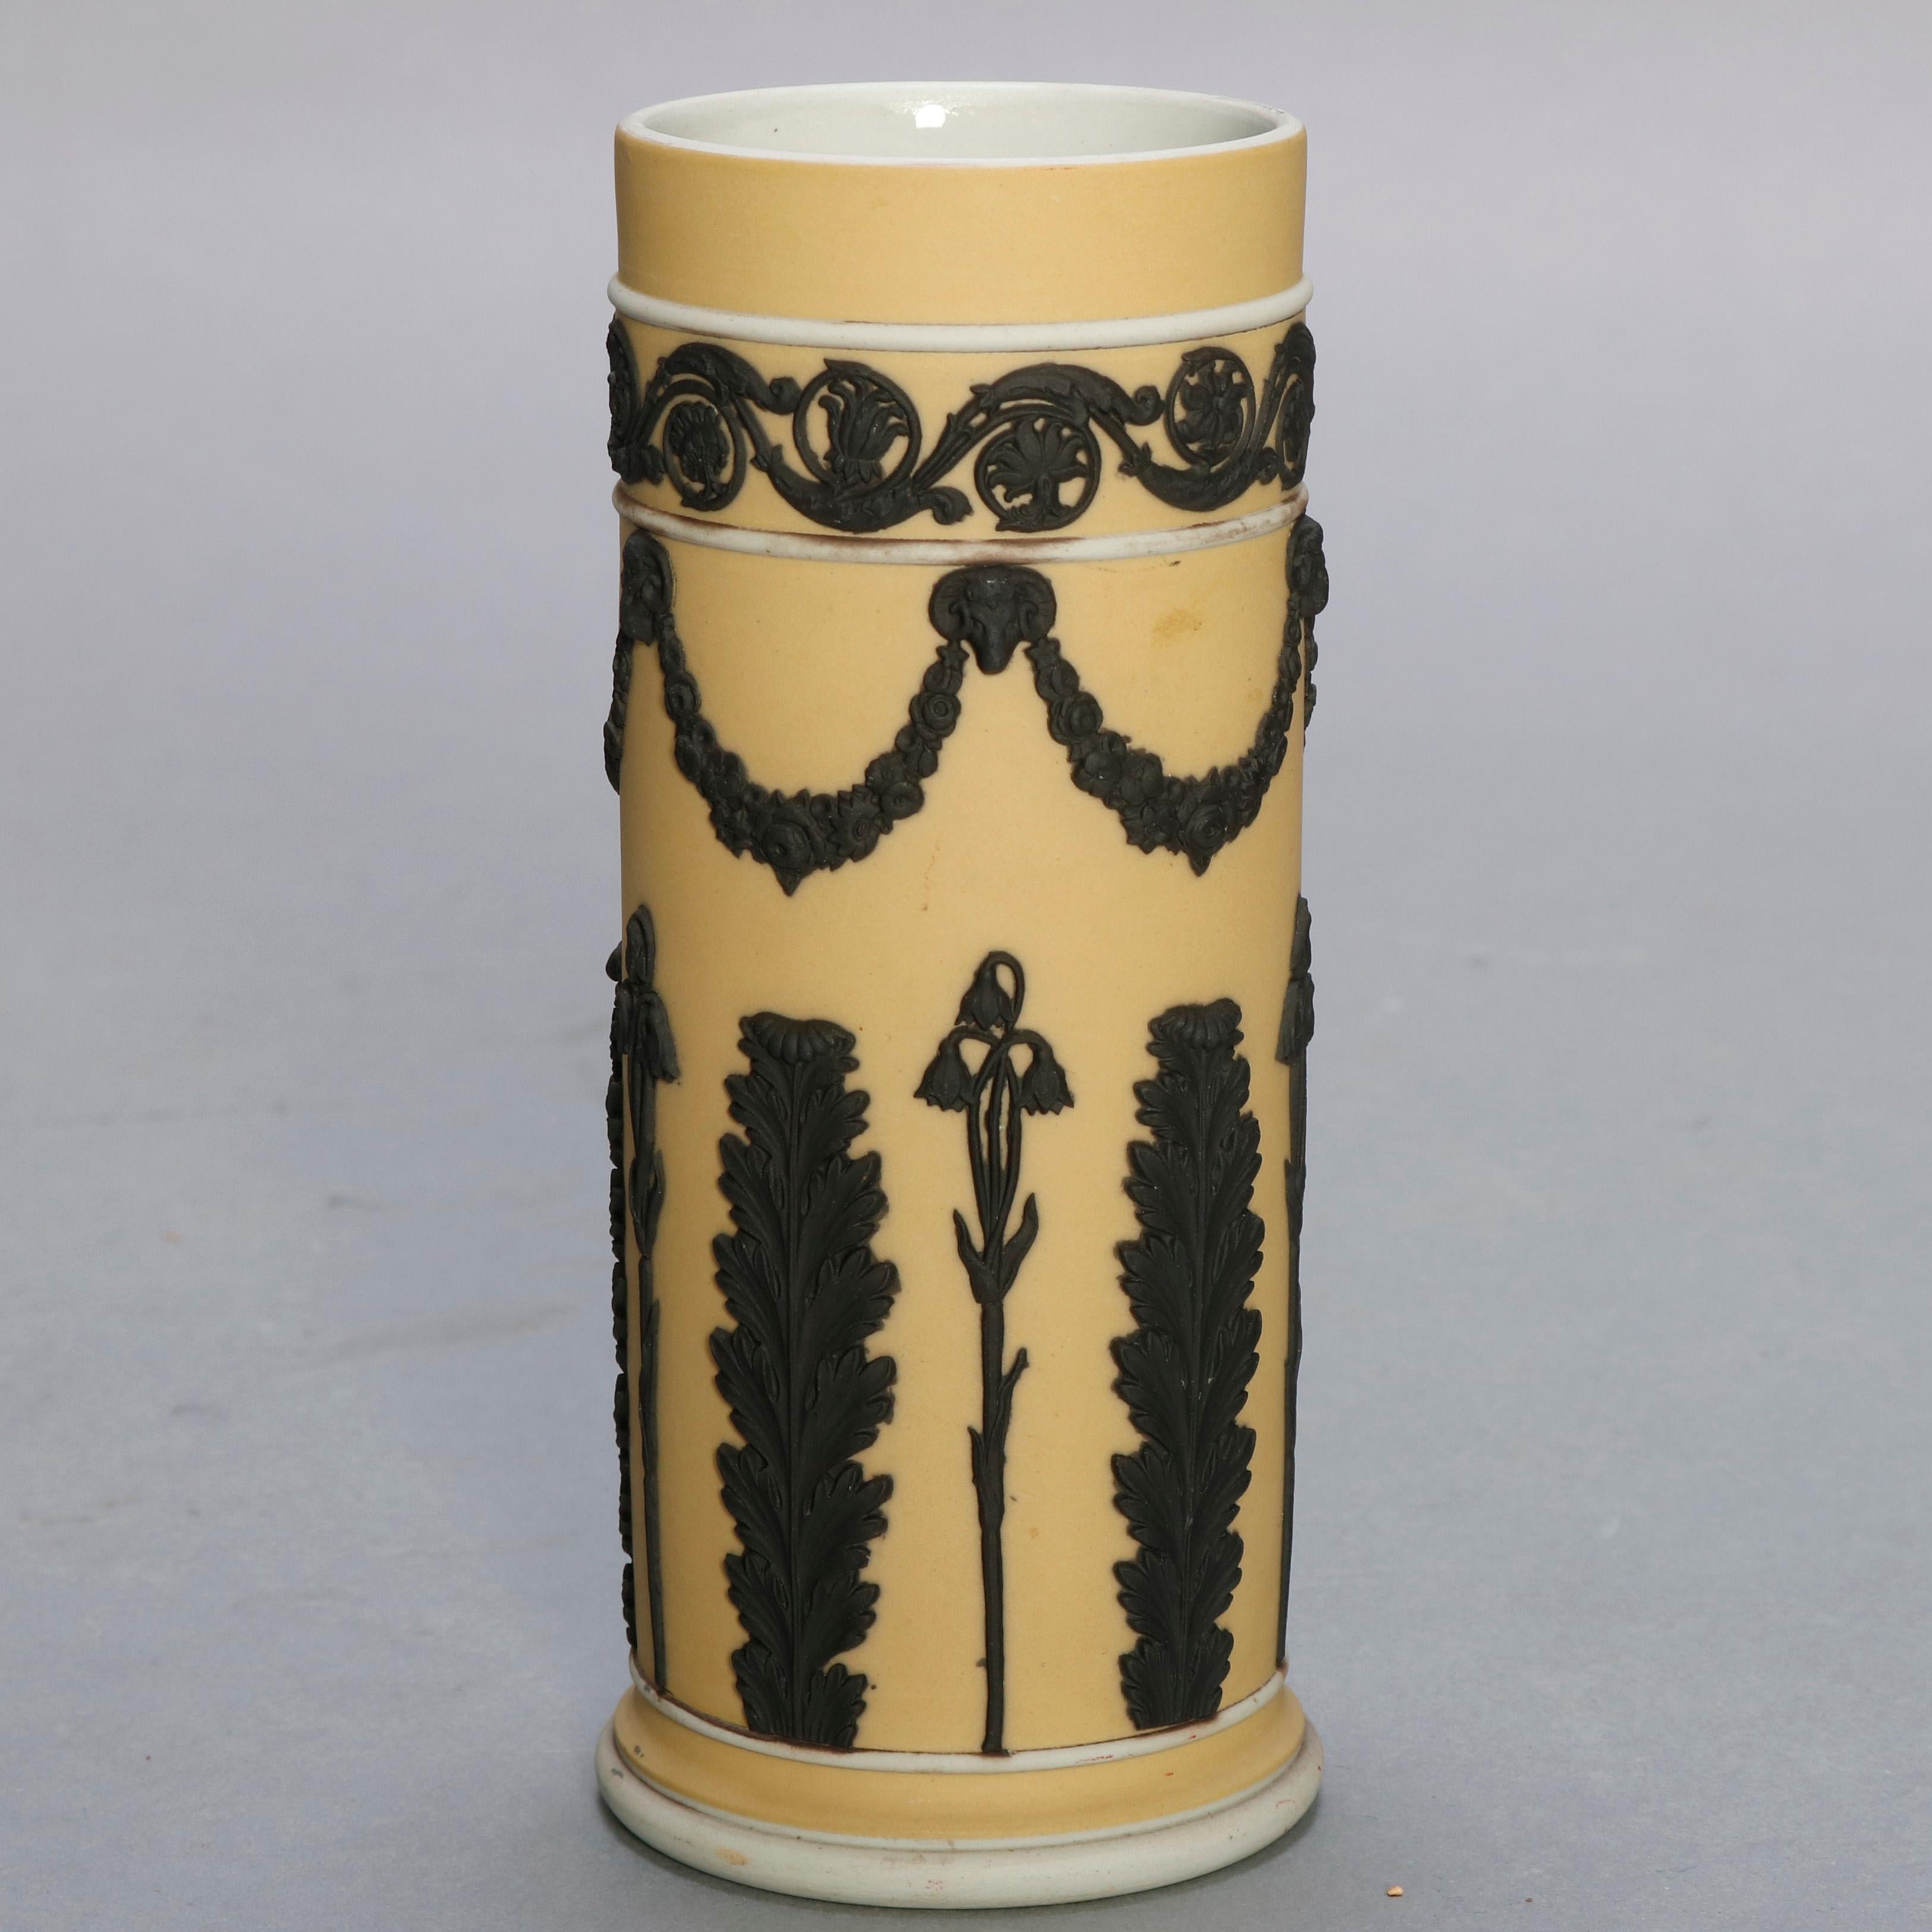 A pair of English Classical spill vases by Wedgwood offer bisque porcelain with yellow dip finish and black basalt bas relief repeating acanthus, foliate swag and scrollwork band, stamped on base as photographed, circa 1930

Measures: 6.5